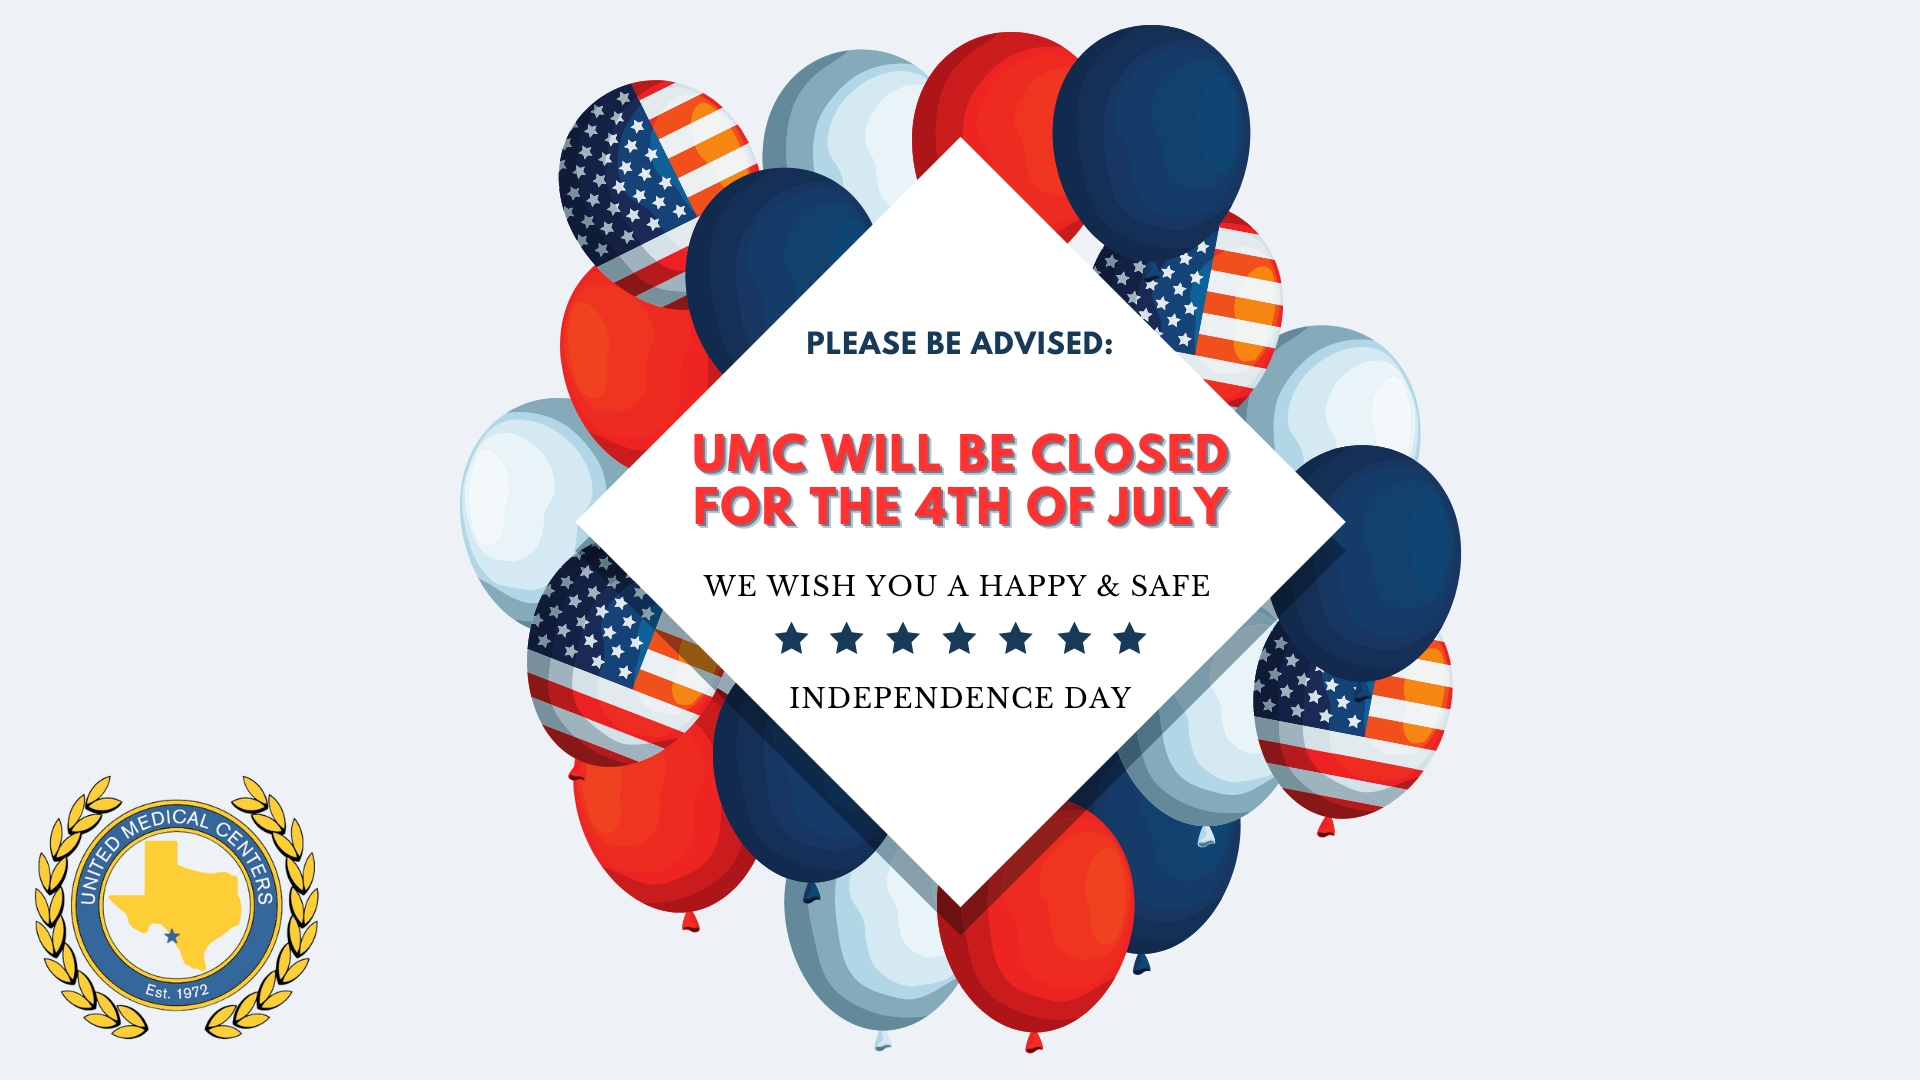 WE WILL BE CLOSED TUESDAY, JULY 4TH, IN OBSERVANCE OF INDEPENDENCE DAY